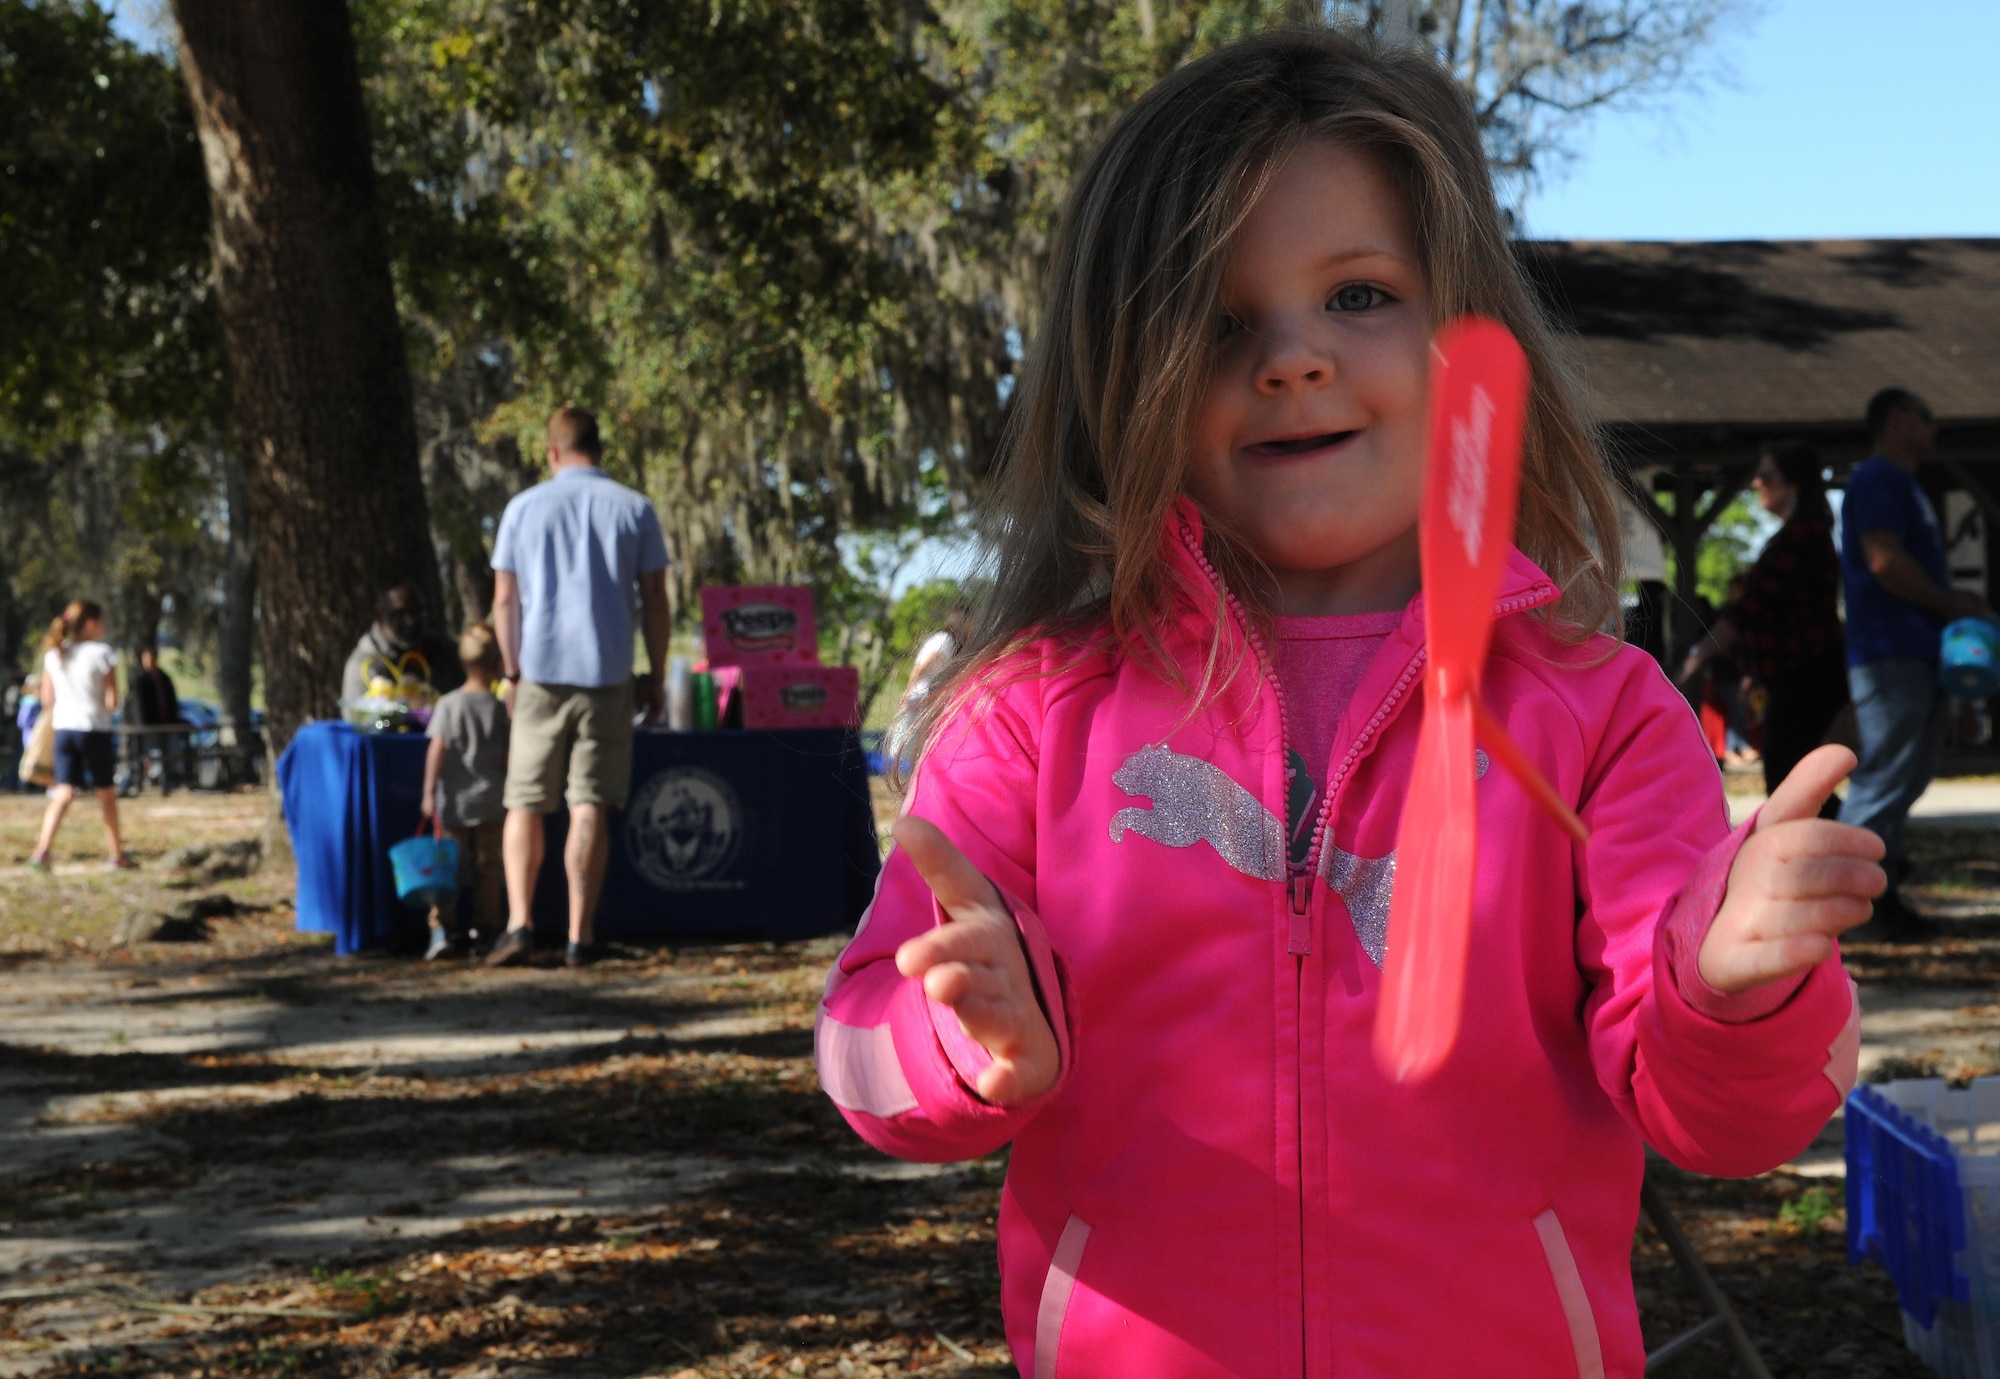 Annelise McClure, daughter of Luke McClure, Keesler Family Housing representative, plays with a toy during Child Pride Day April 8, 2017, on Keesler Air Force Base, Miss. The event festivities included a parade, Easter egg hunt, arts and crafts and information booths for more than 1,000 children and family members in celebration of the Month of the Military Child. (U.S. Air Force photo by Senior Airman Holly Mansfield) 